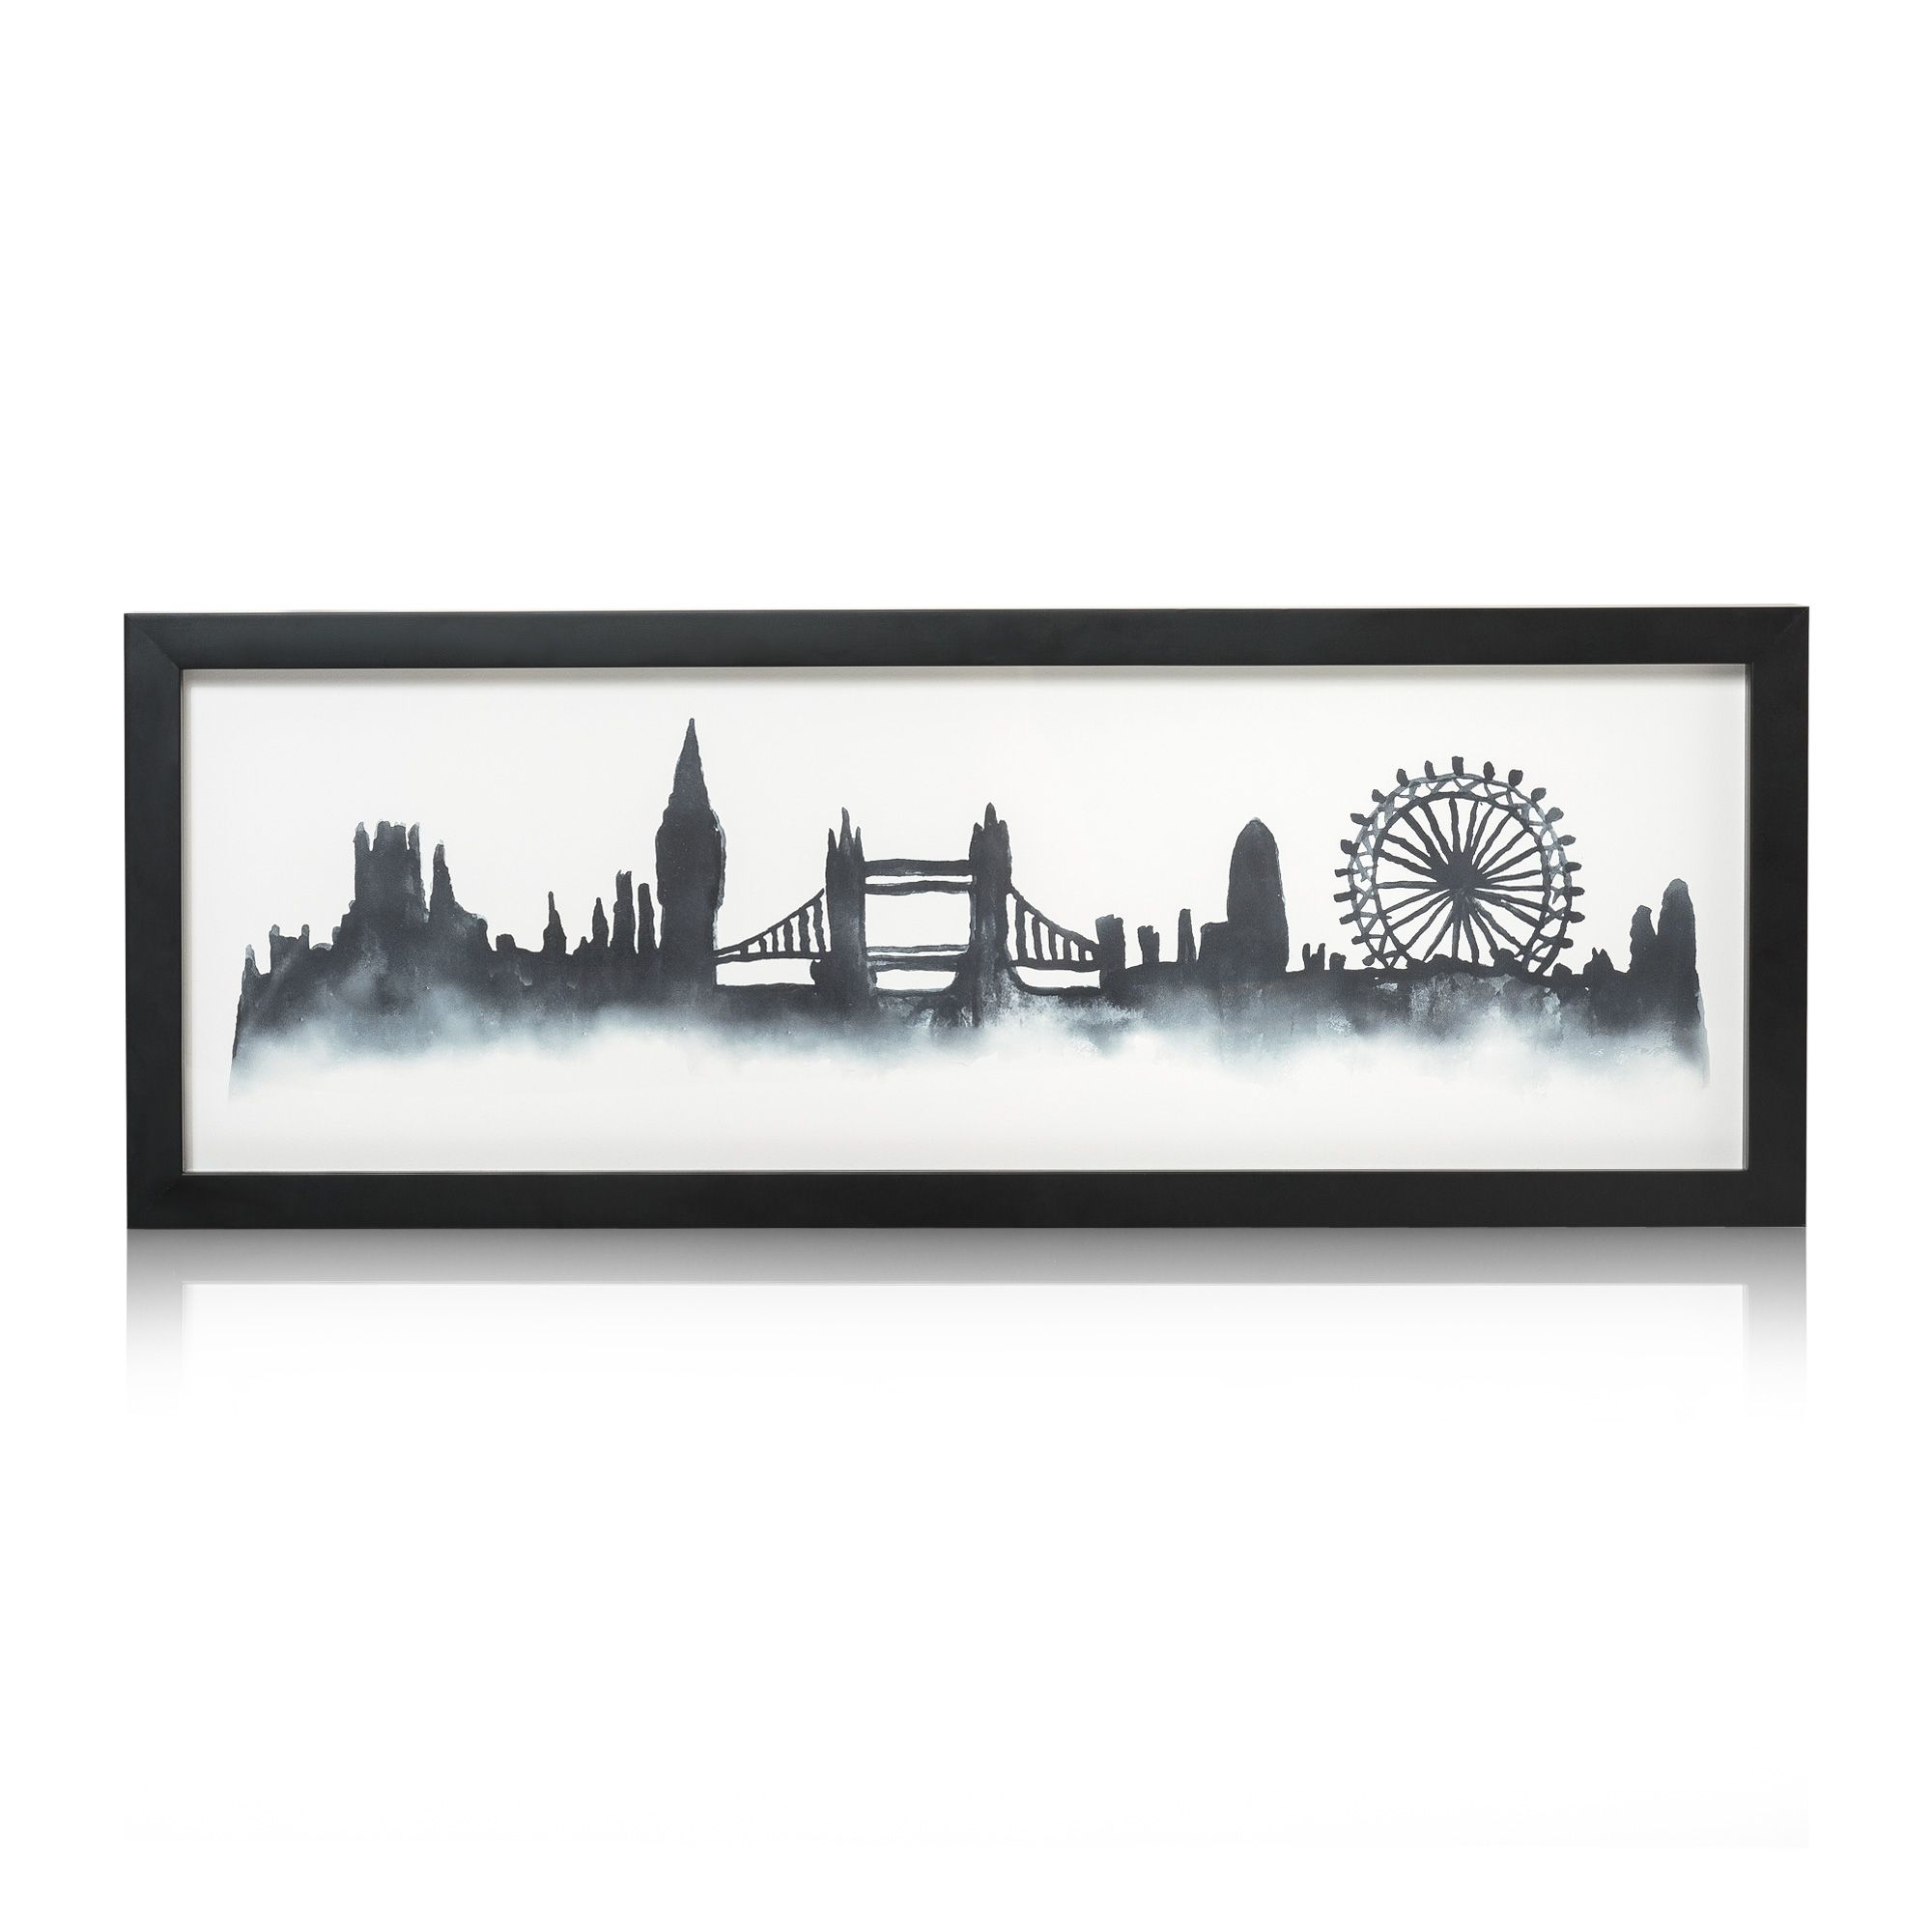 London Skyline Wall Art | Oliver Bonas Intended For Recent London Wall Art (View 1 of 20)